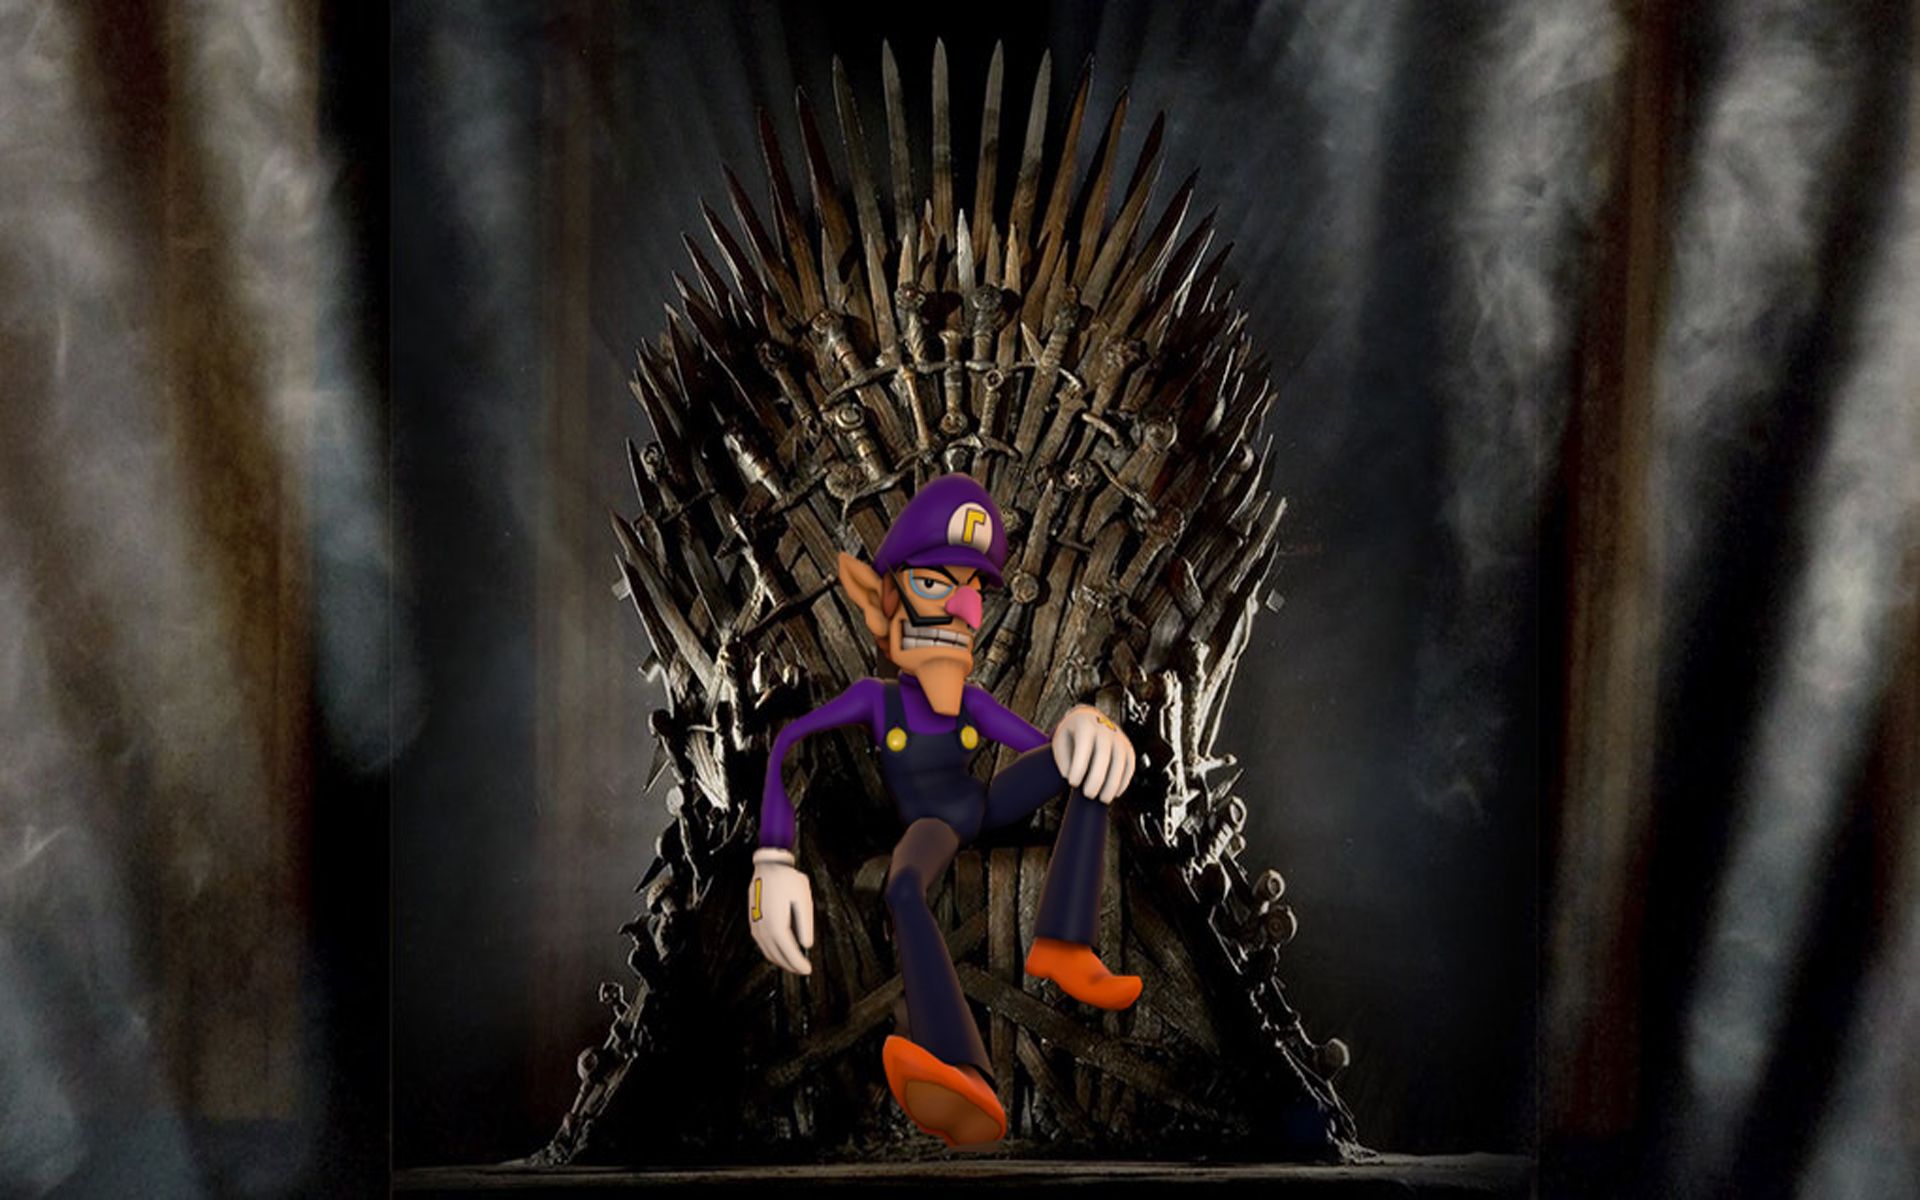 Game of Thrones Author George R. R. Martin Says Waluigi Was Always Meant To Sit On The Iron Throne